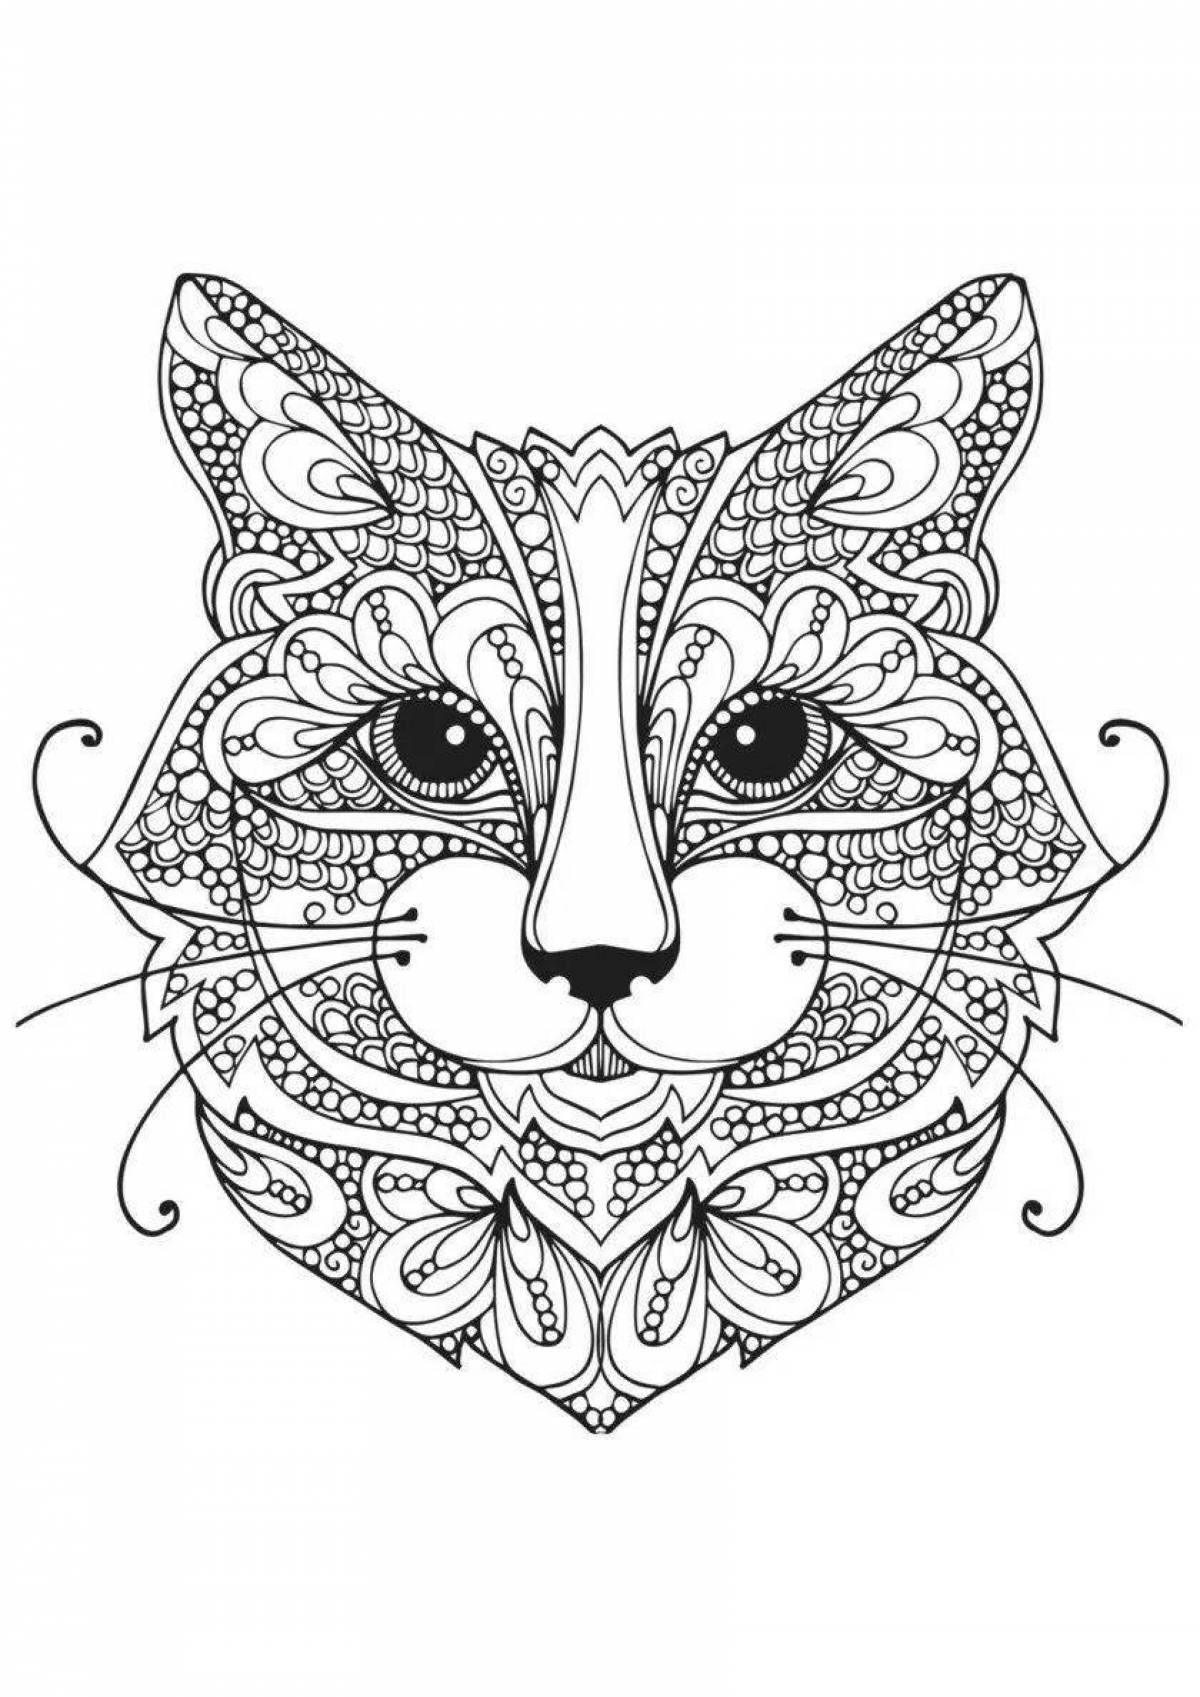 Adorable cat coloring book with pattern